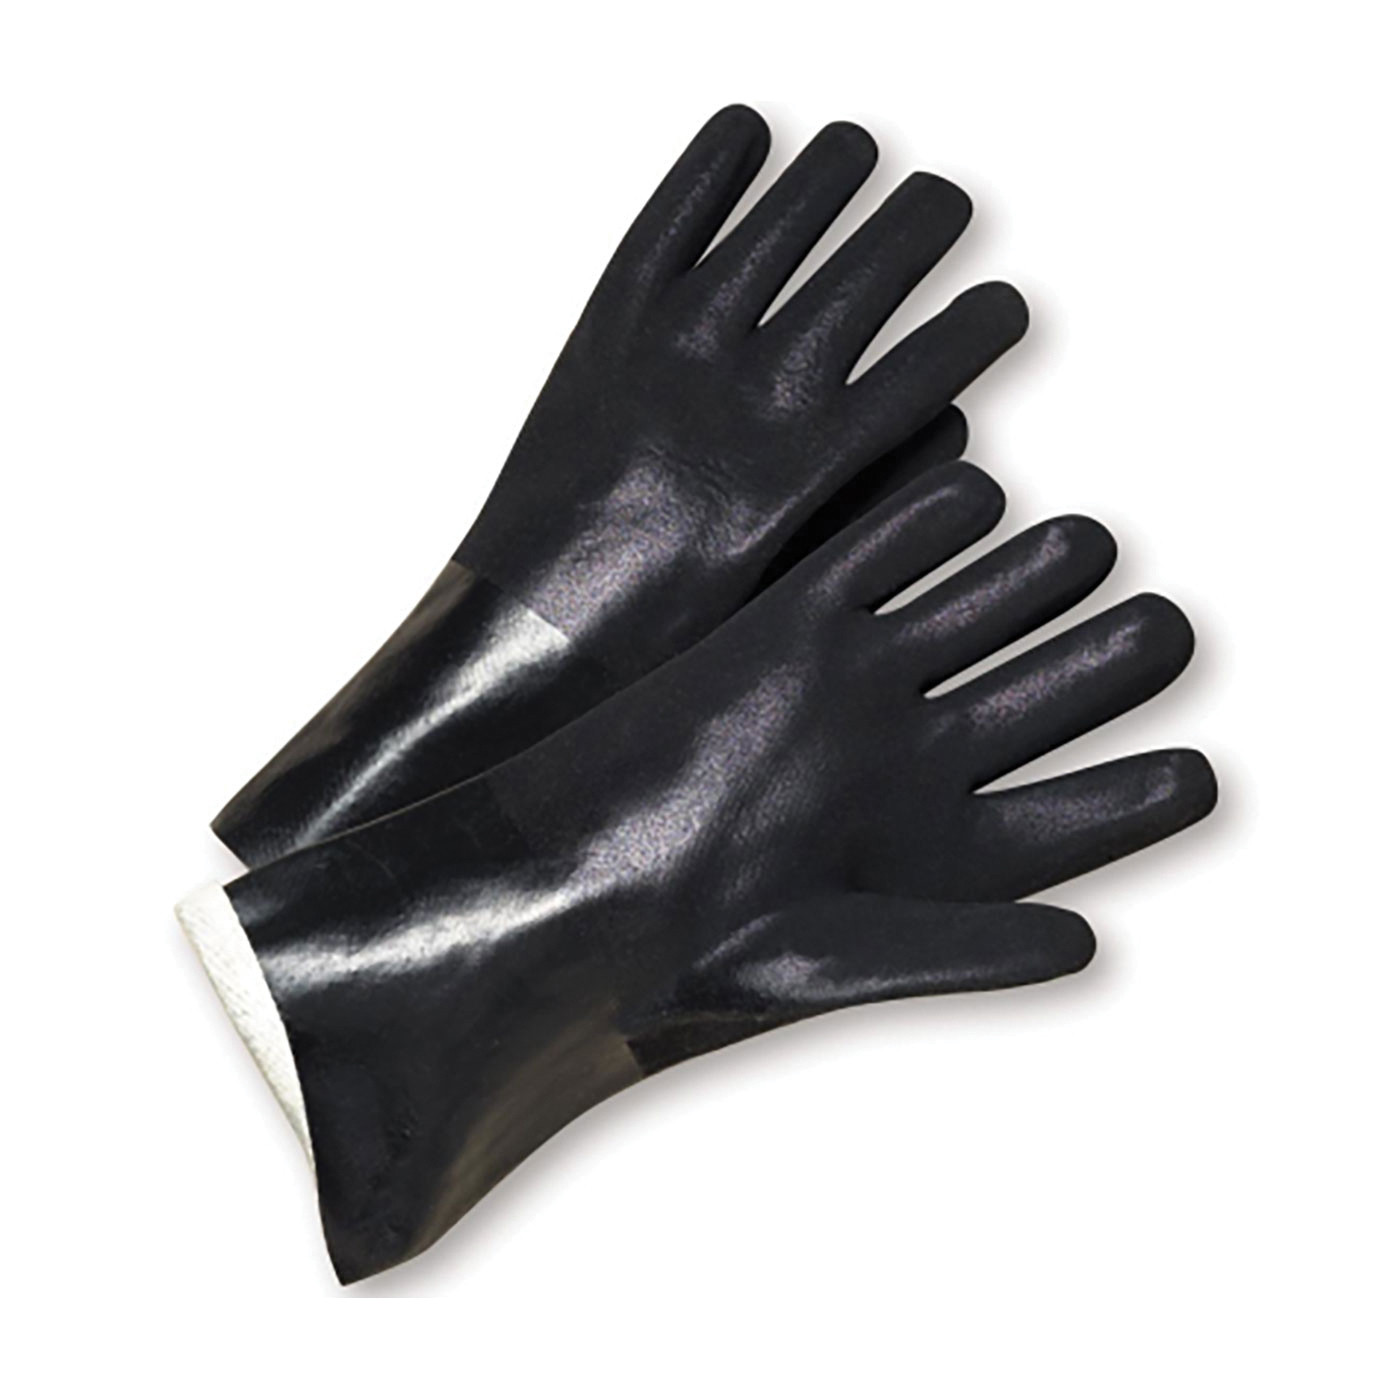 PIP® J1047RF Standard Chemical-Resistant Gloves, L, Pair Hand, Black, Jersey Lining, 14 in L, Resists: Abrasion, Acid, Chemical, Grease, Oil, Water and Solvent, Supported Support, Gauntlet Cuff